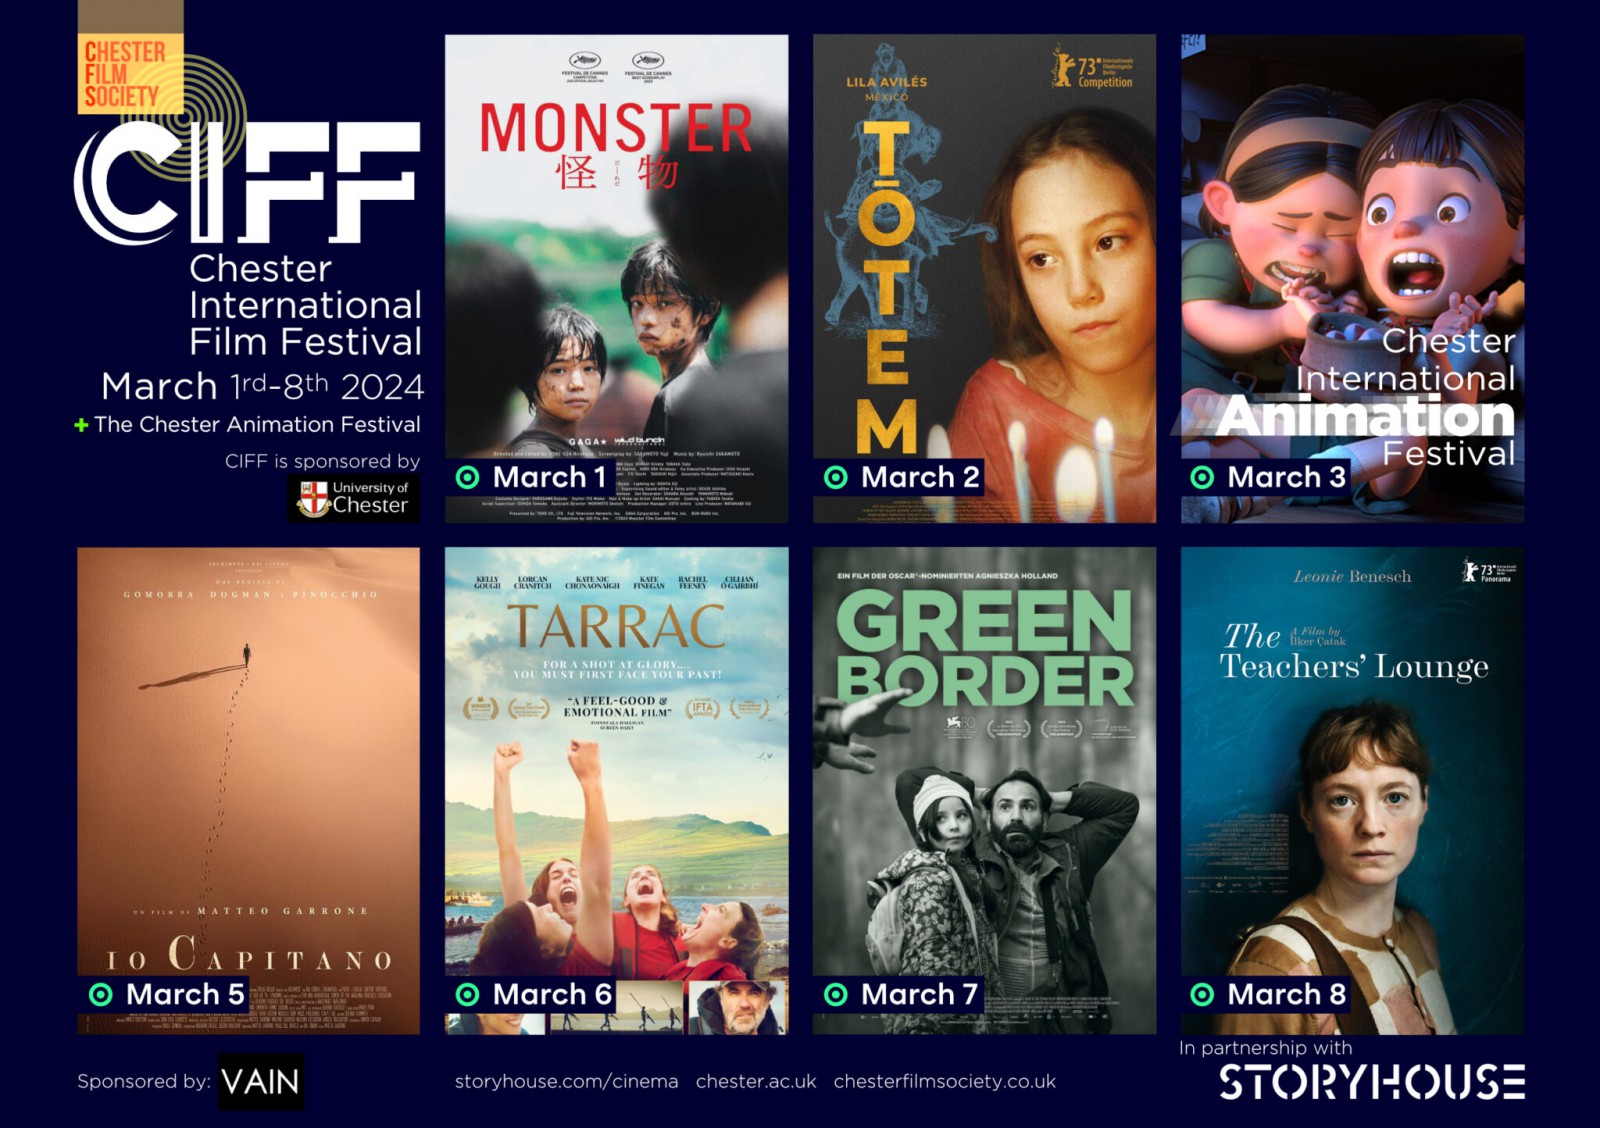 Chester Film Festival poster. Eight different movie covers shown. Two rows of four movies.